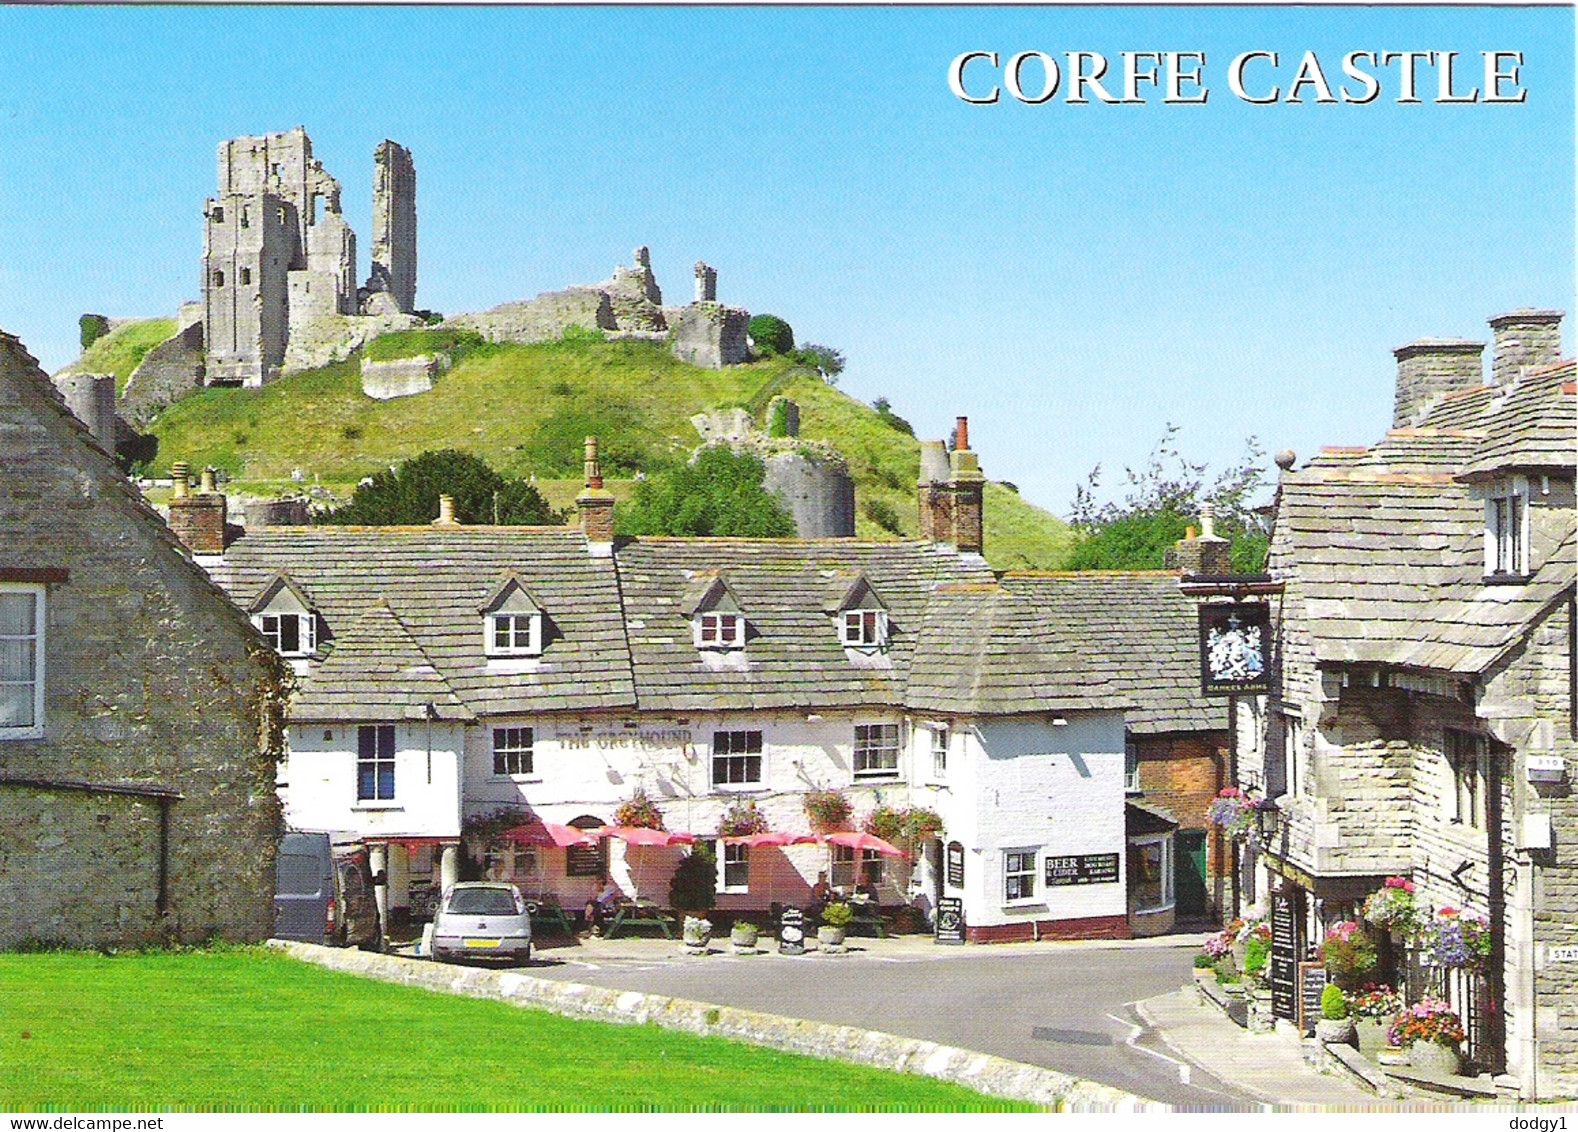 THE CASTLE FROM THE VILLAGE, CORFE CASTLE, DORSET, ENGLAND. UNUSED POSTCARD Ap2 - Swanage